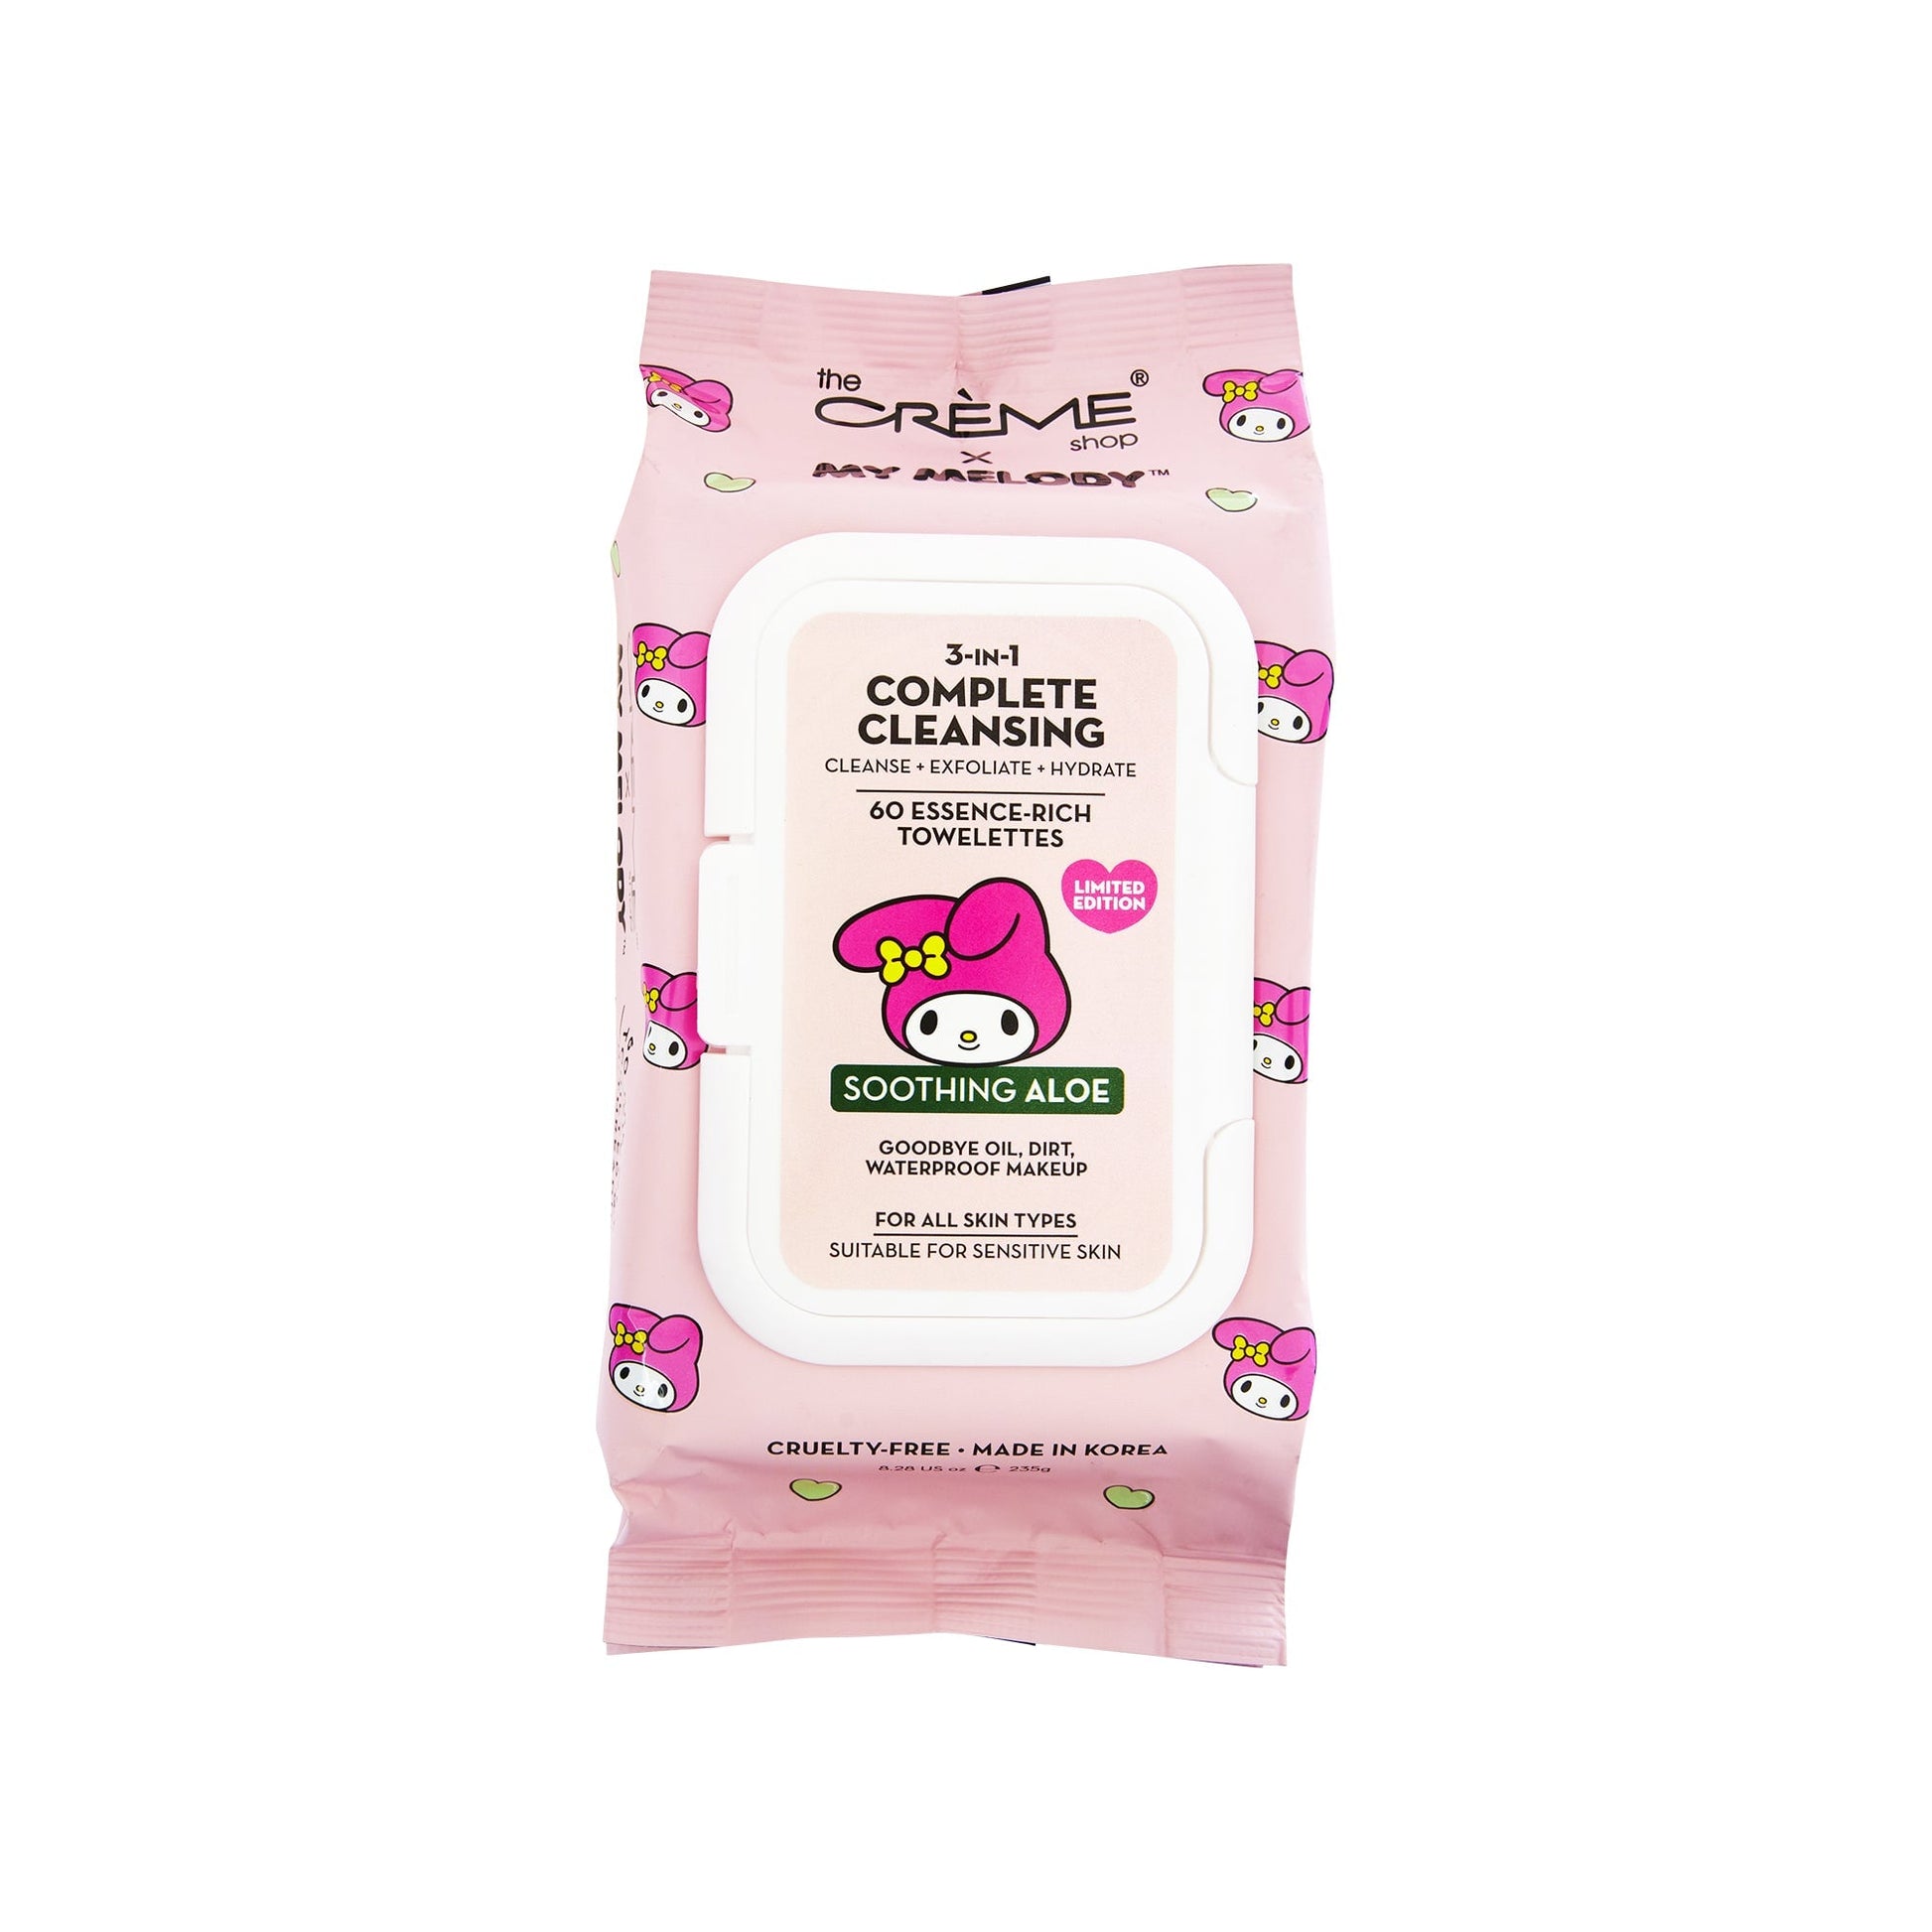 My Melody 3-IN-1 Complete Cleansing Essence-Rich Towelettes - Smoothing Aloe Towelettes The Crème Shop x Sanrio 